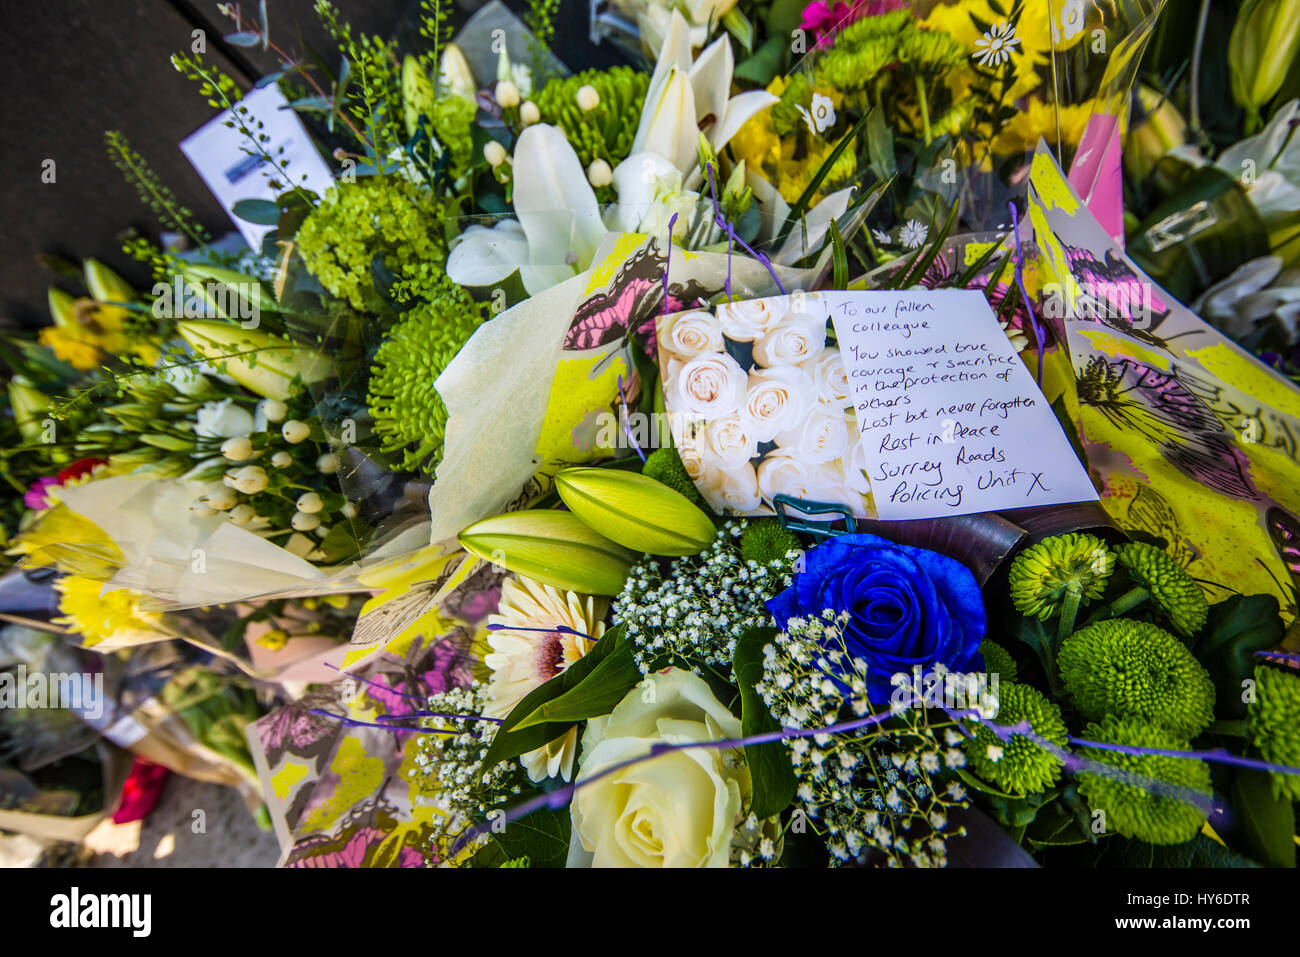 Floral tributes in honour of PC Keith Palmer placed at the National Police Memorial in The Mall London.PC Palmer was killed in Parliament by terrorism Stock Photo